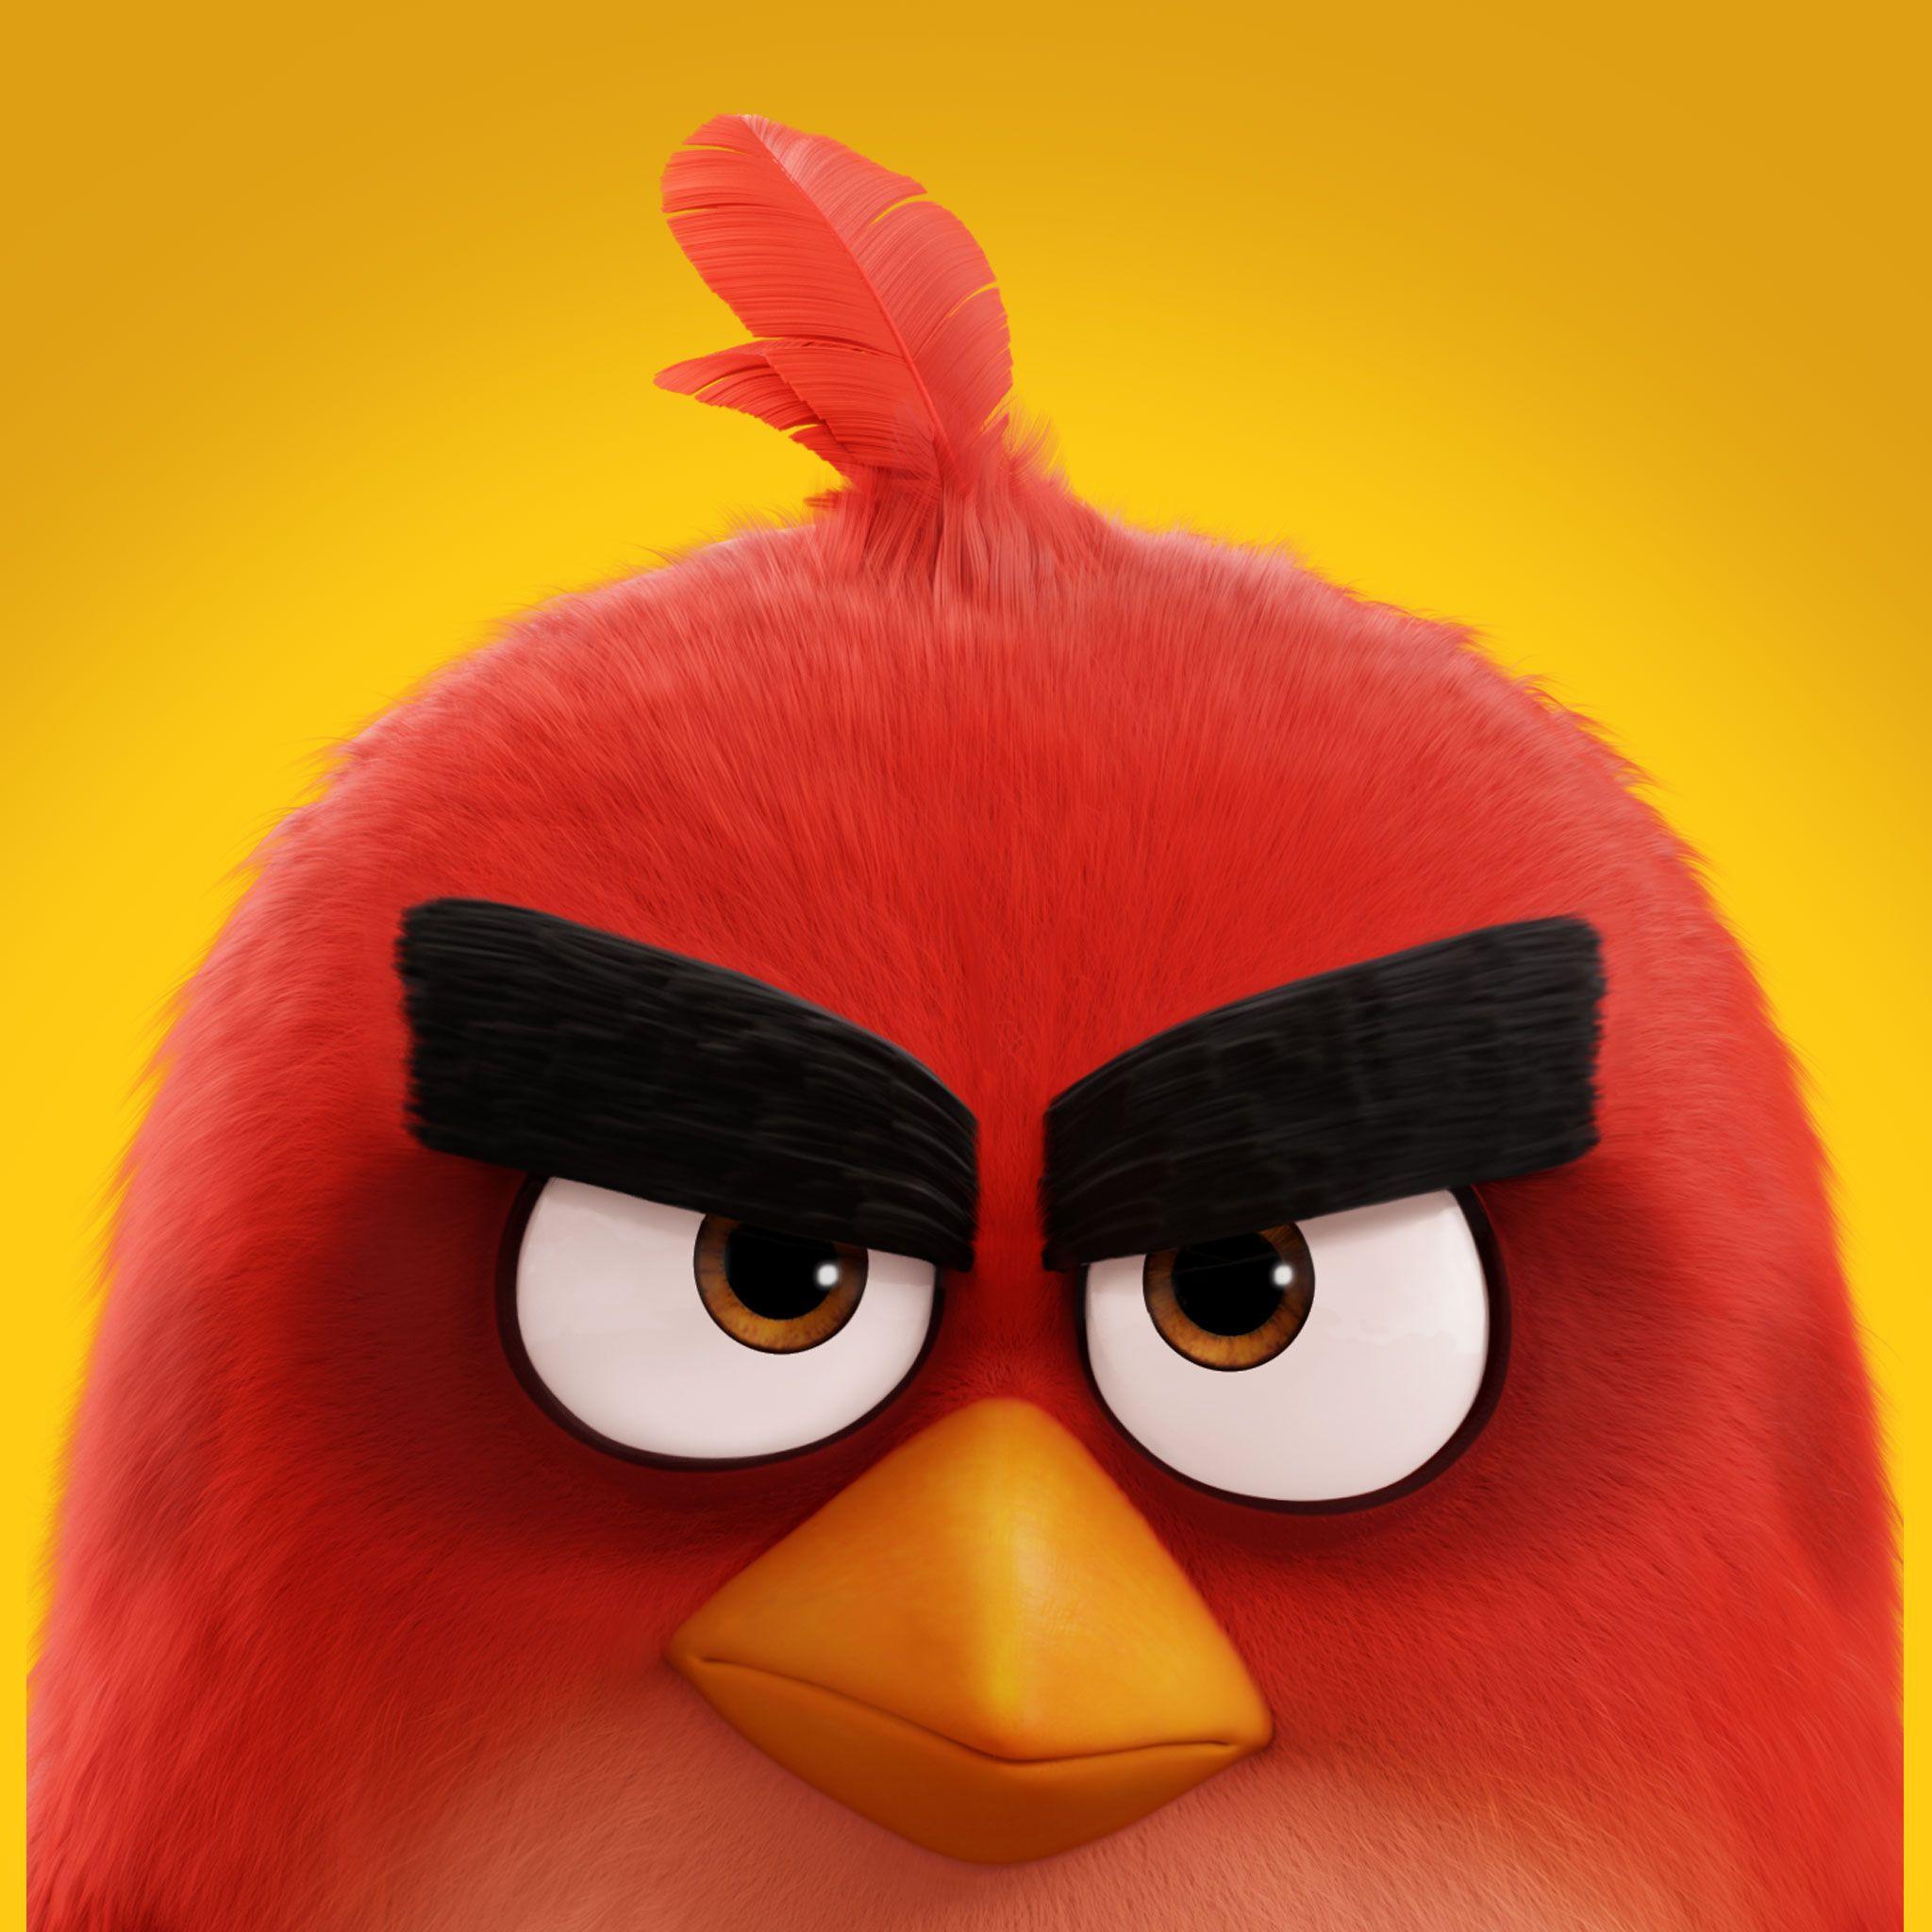 Wallpaper Angry Birds 3d Image Num 81